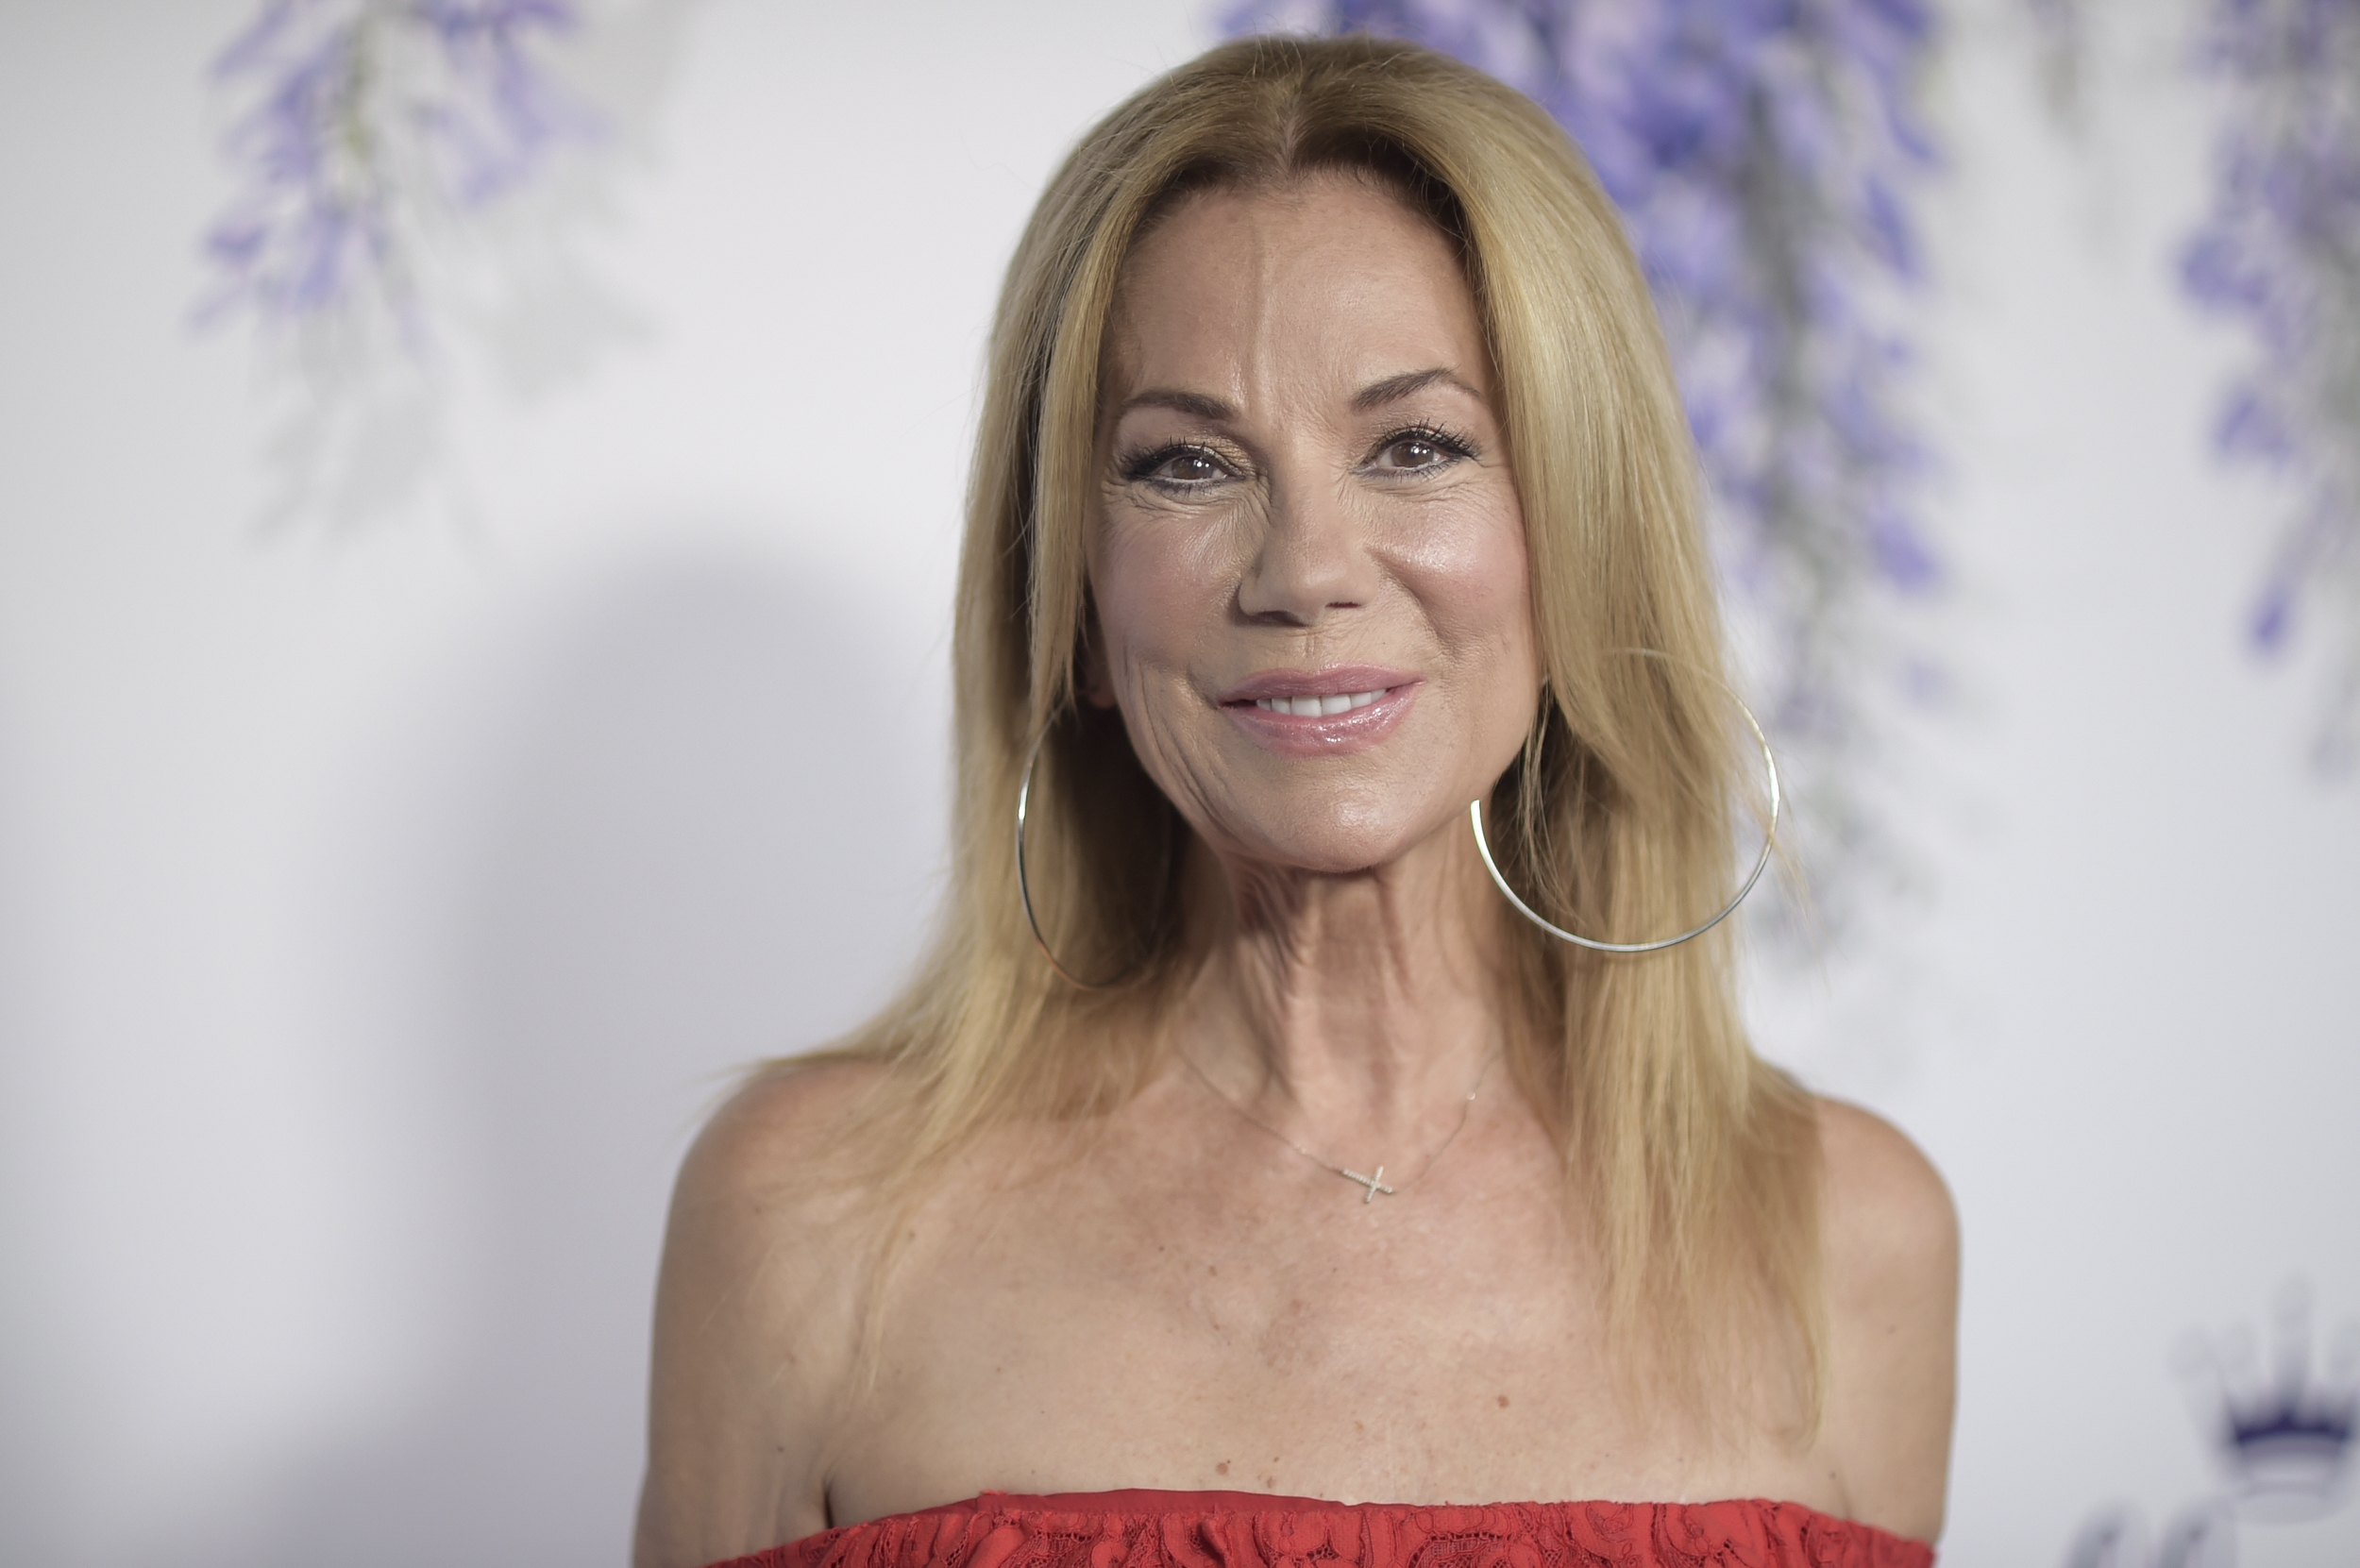 NEW YORK (AP) — Kathie Lee Gifford will put aside her morning glass of wine...